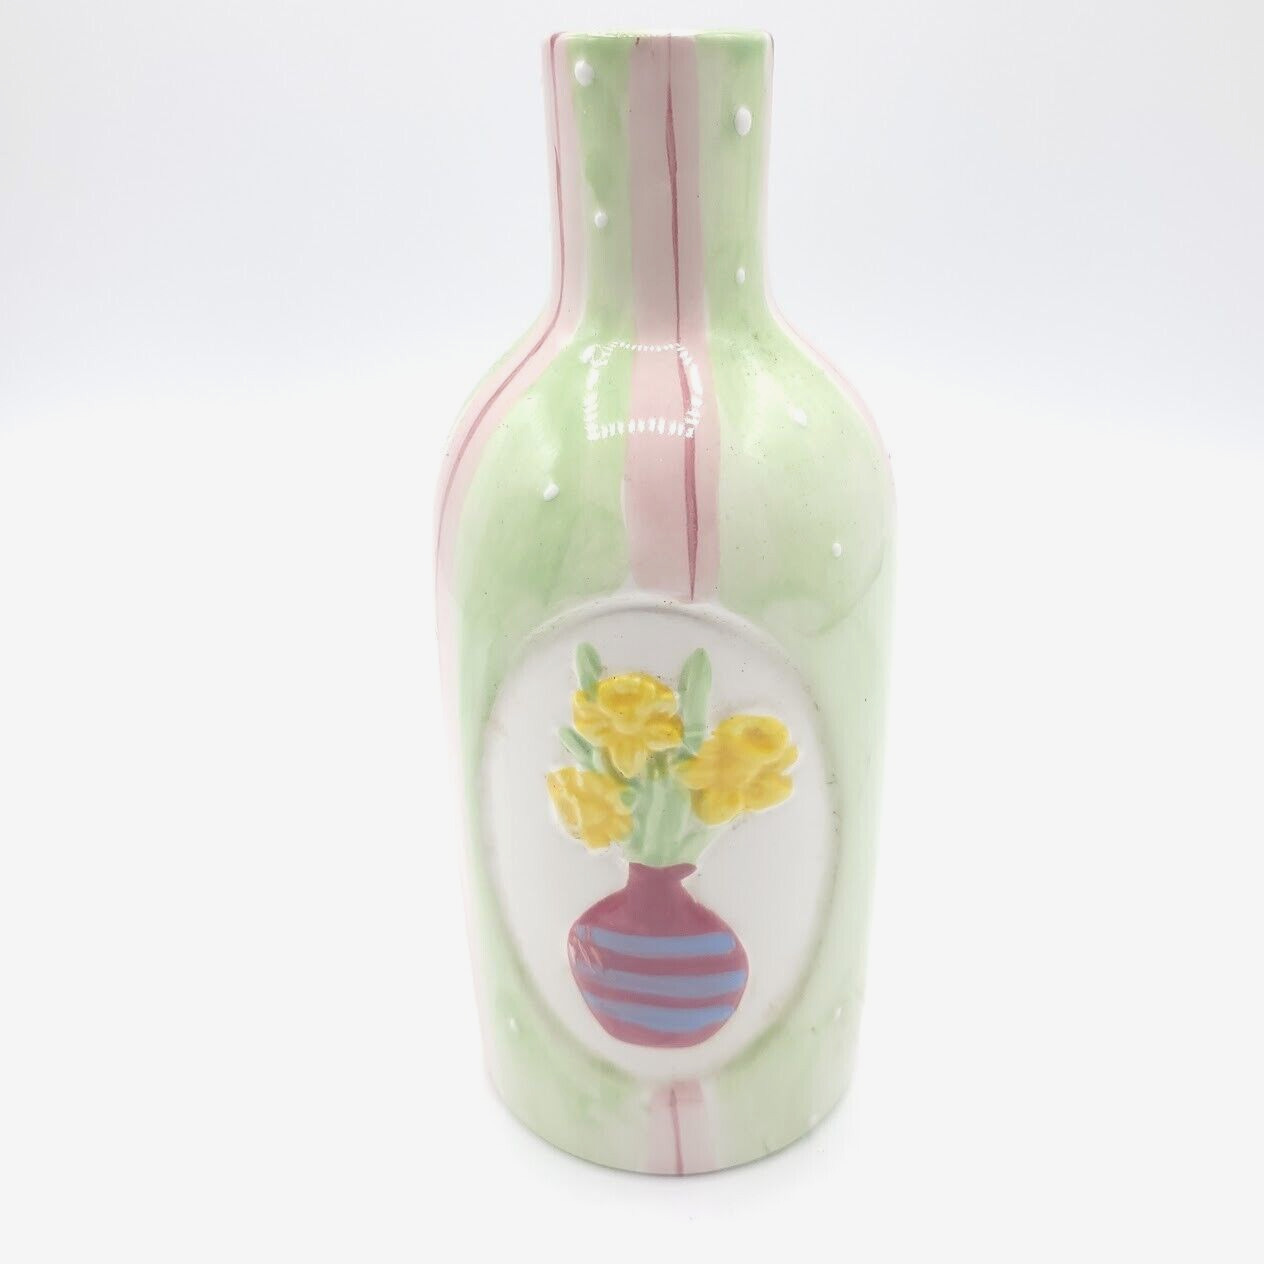 Small Flower Vase Ceramic Floral Etched Design Green Pink Yellow 6.50 in.